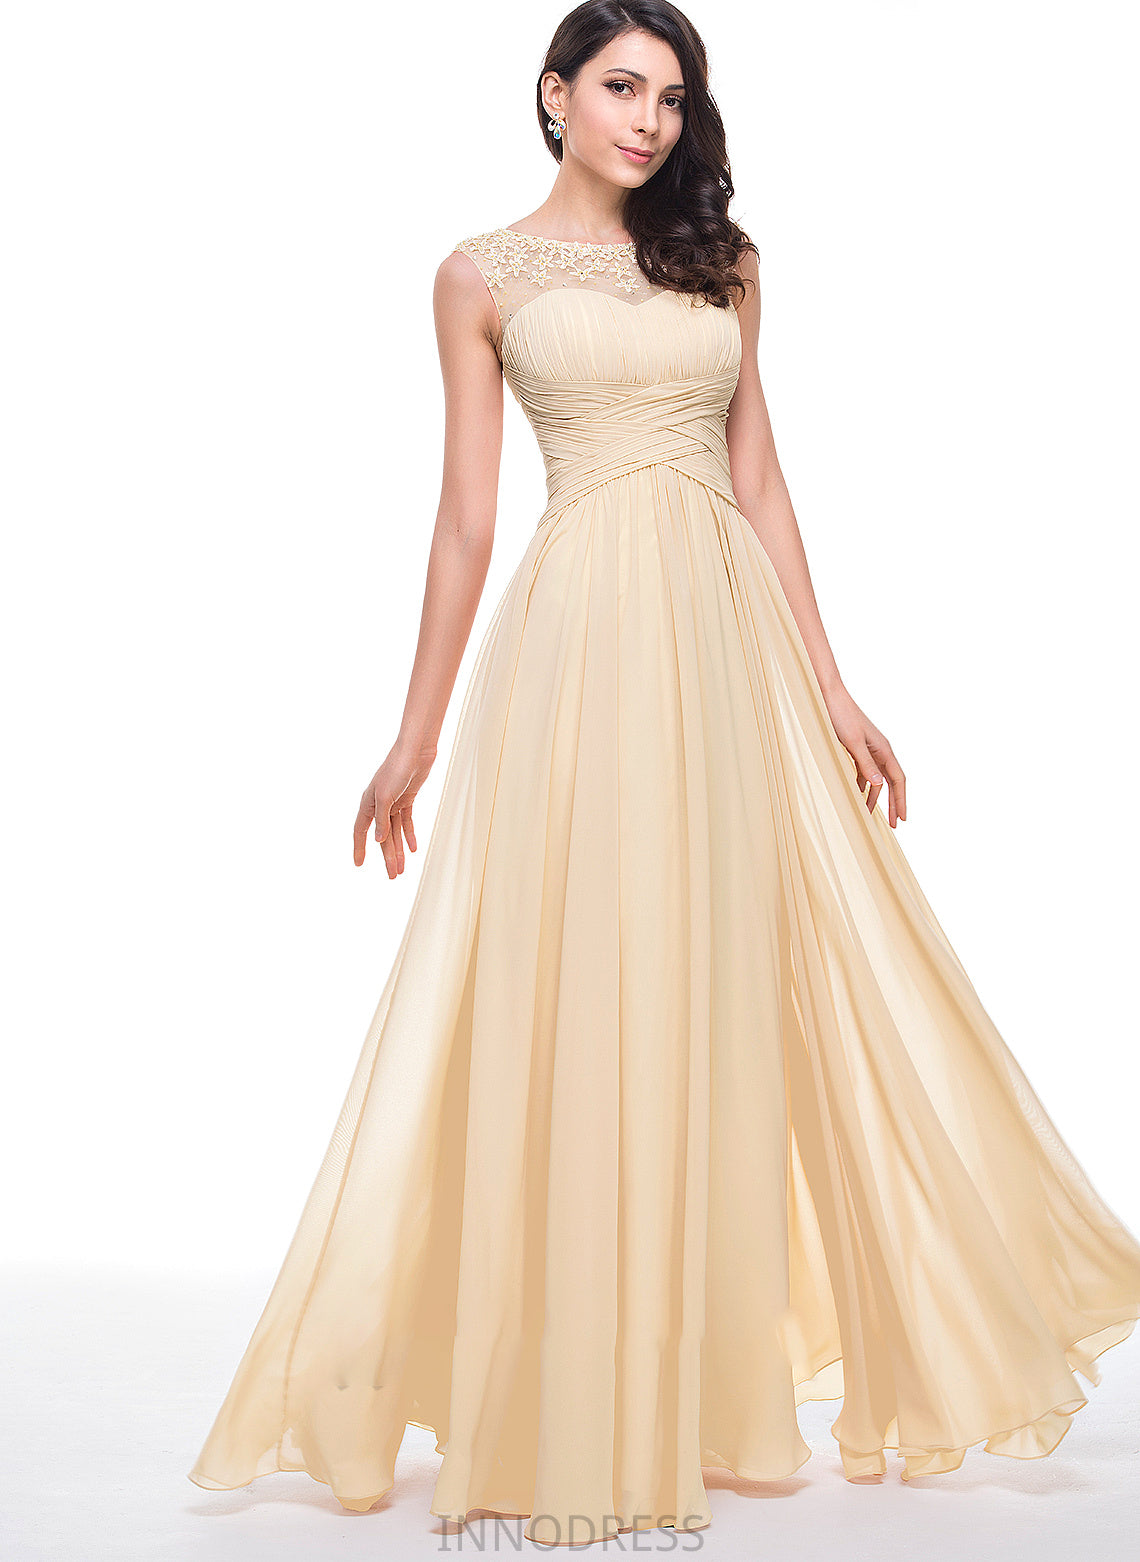 Prom Dresses A-Line Scoop With Flower(s) Floor-Length Neck Chiffon Ruffle Beading Nora